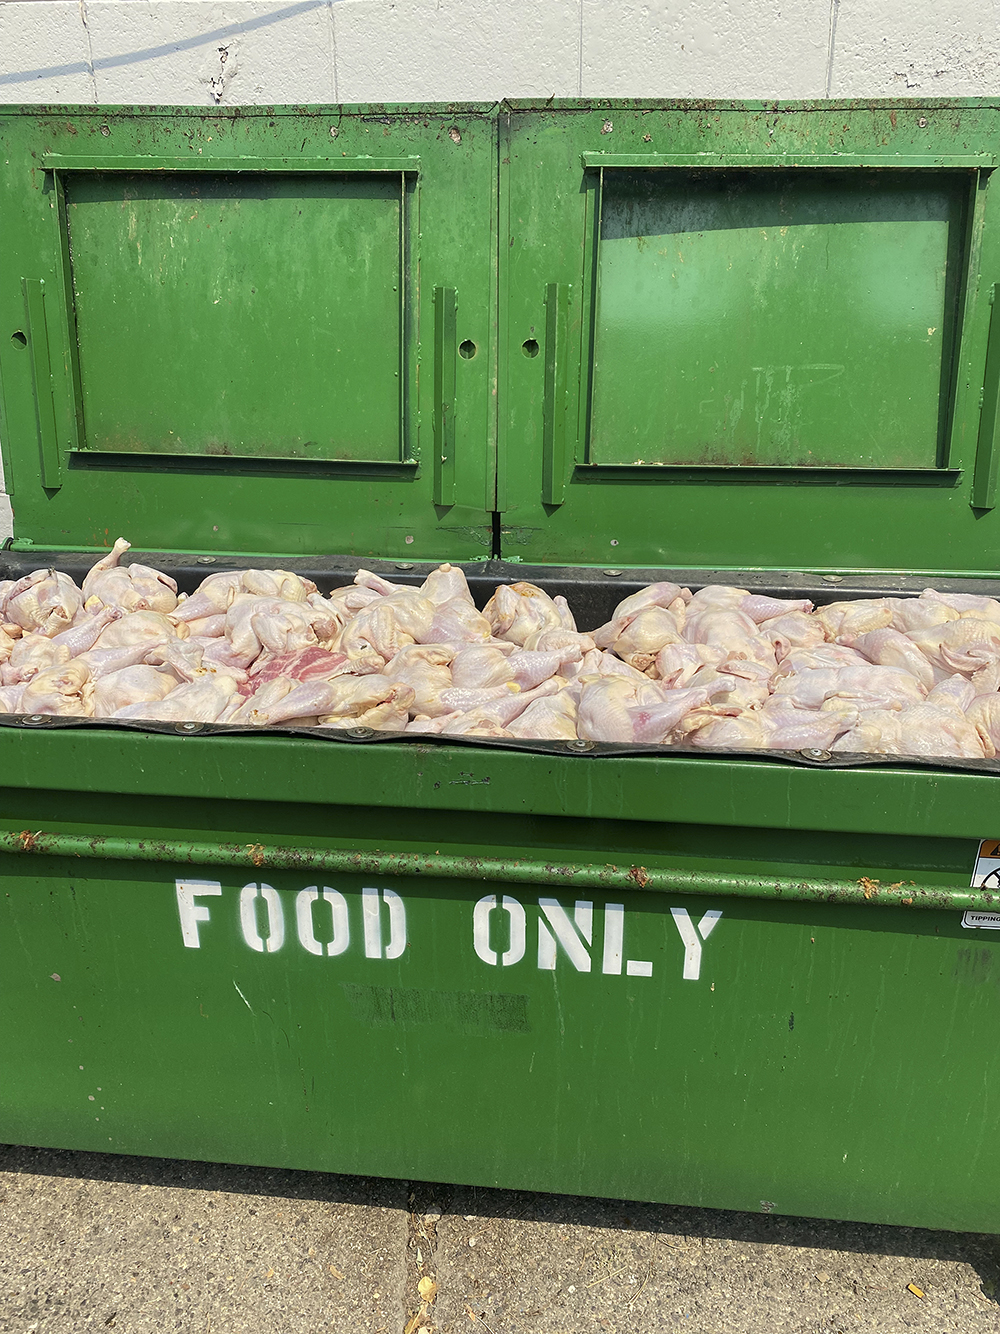 A bright green garbage dumpster painted with the words "Food Only" full of raw chicken.